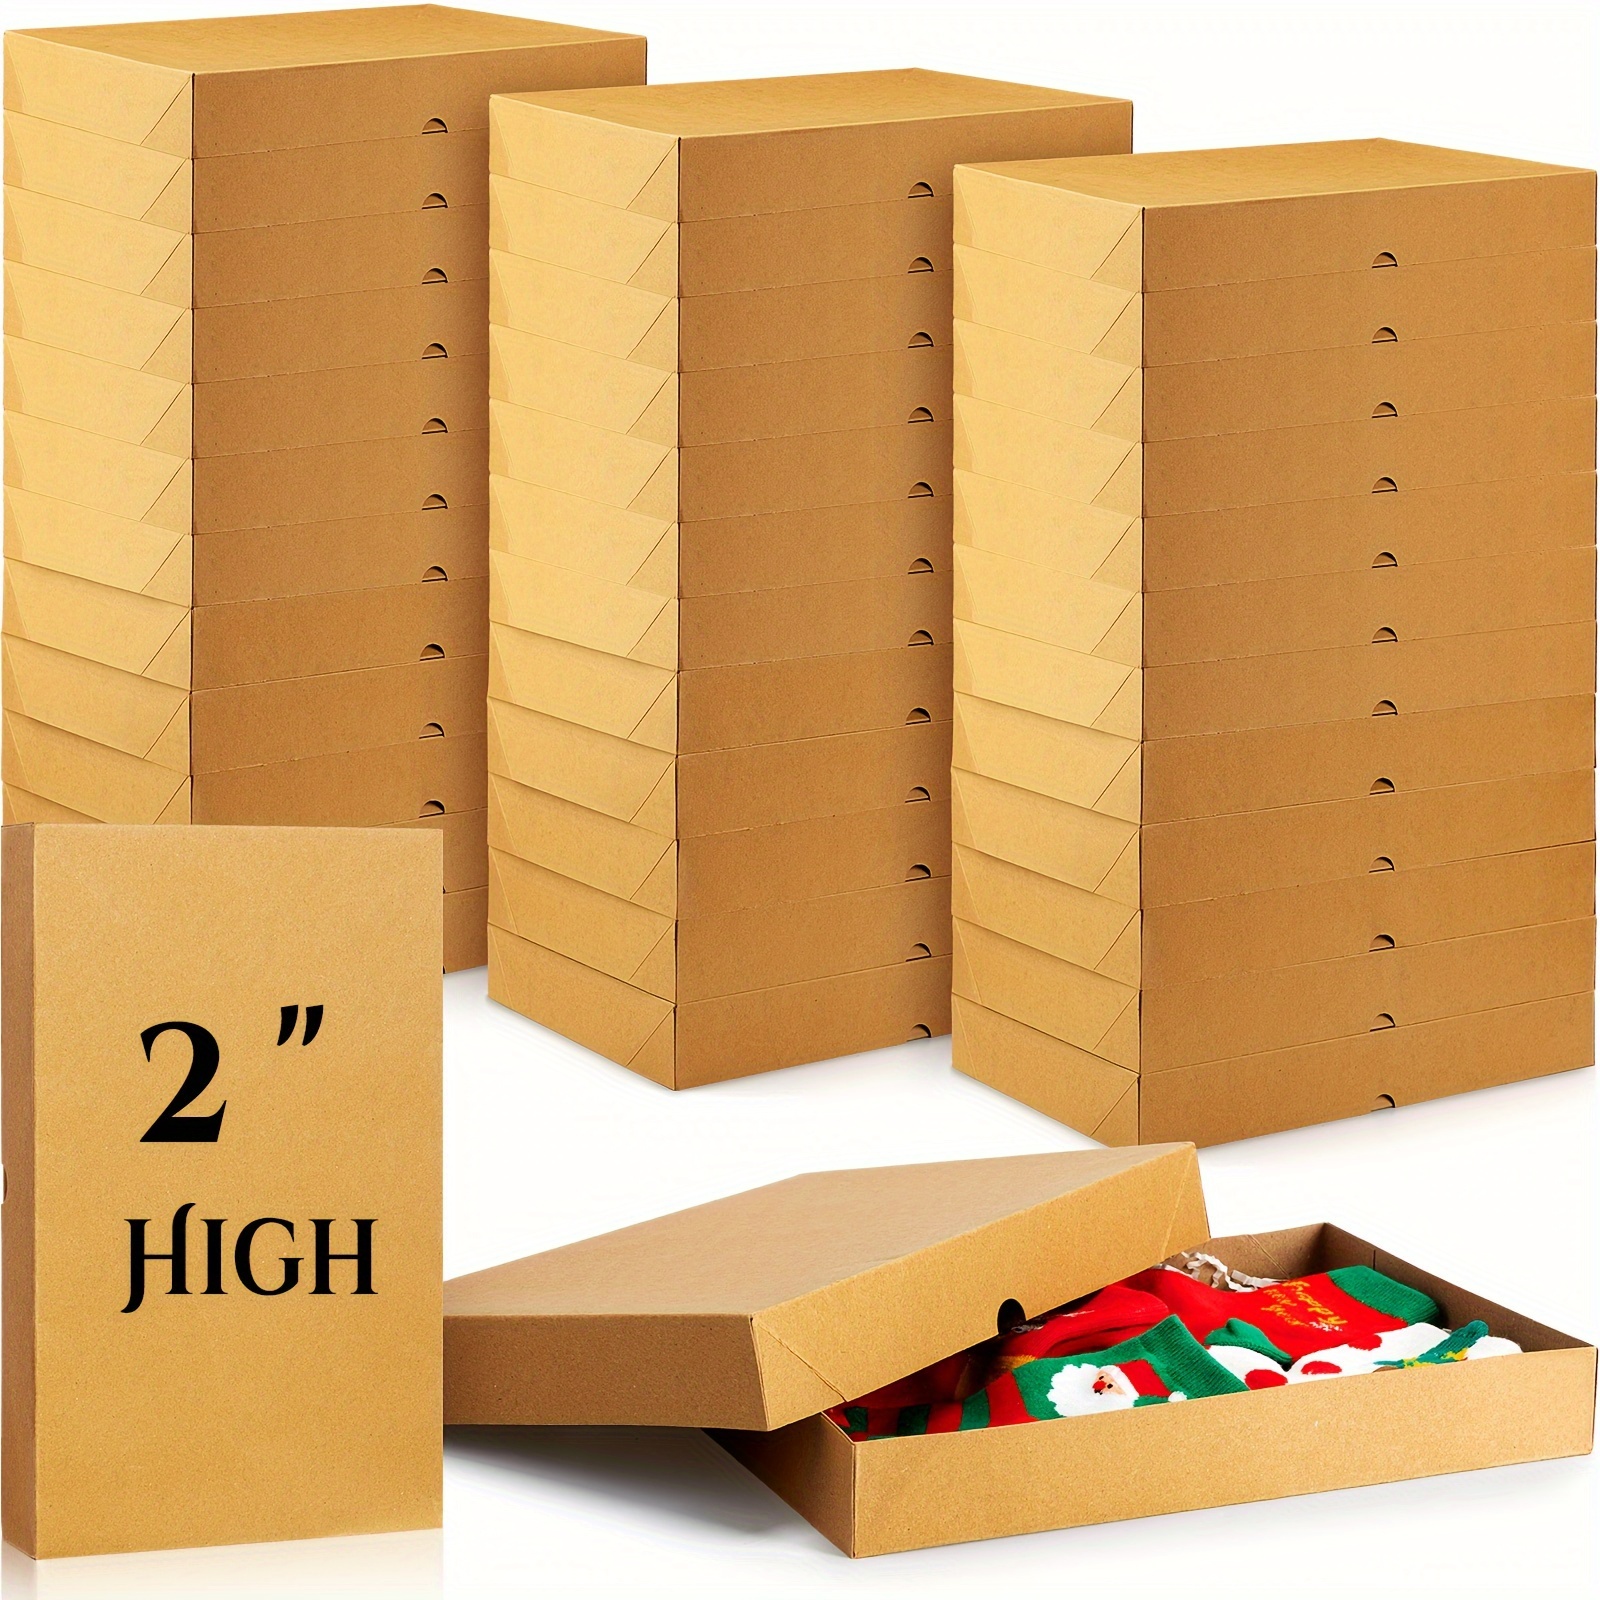 

48pcs Large Gift Boxes Bulk For Clothes Deep Shirt Box With Lid For Robe Presents Wrapping Christmas Holiday Birthday (natural Color, 14.25 X 9.5 X 2 Inch)